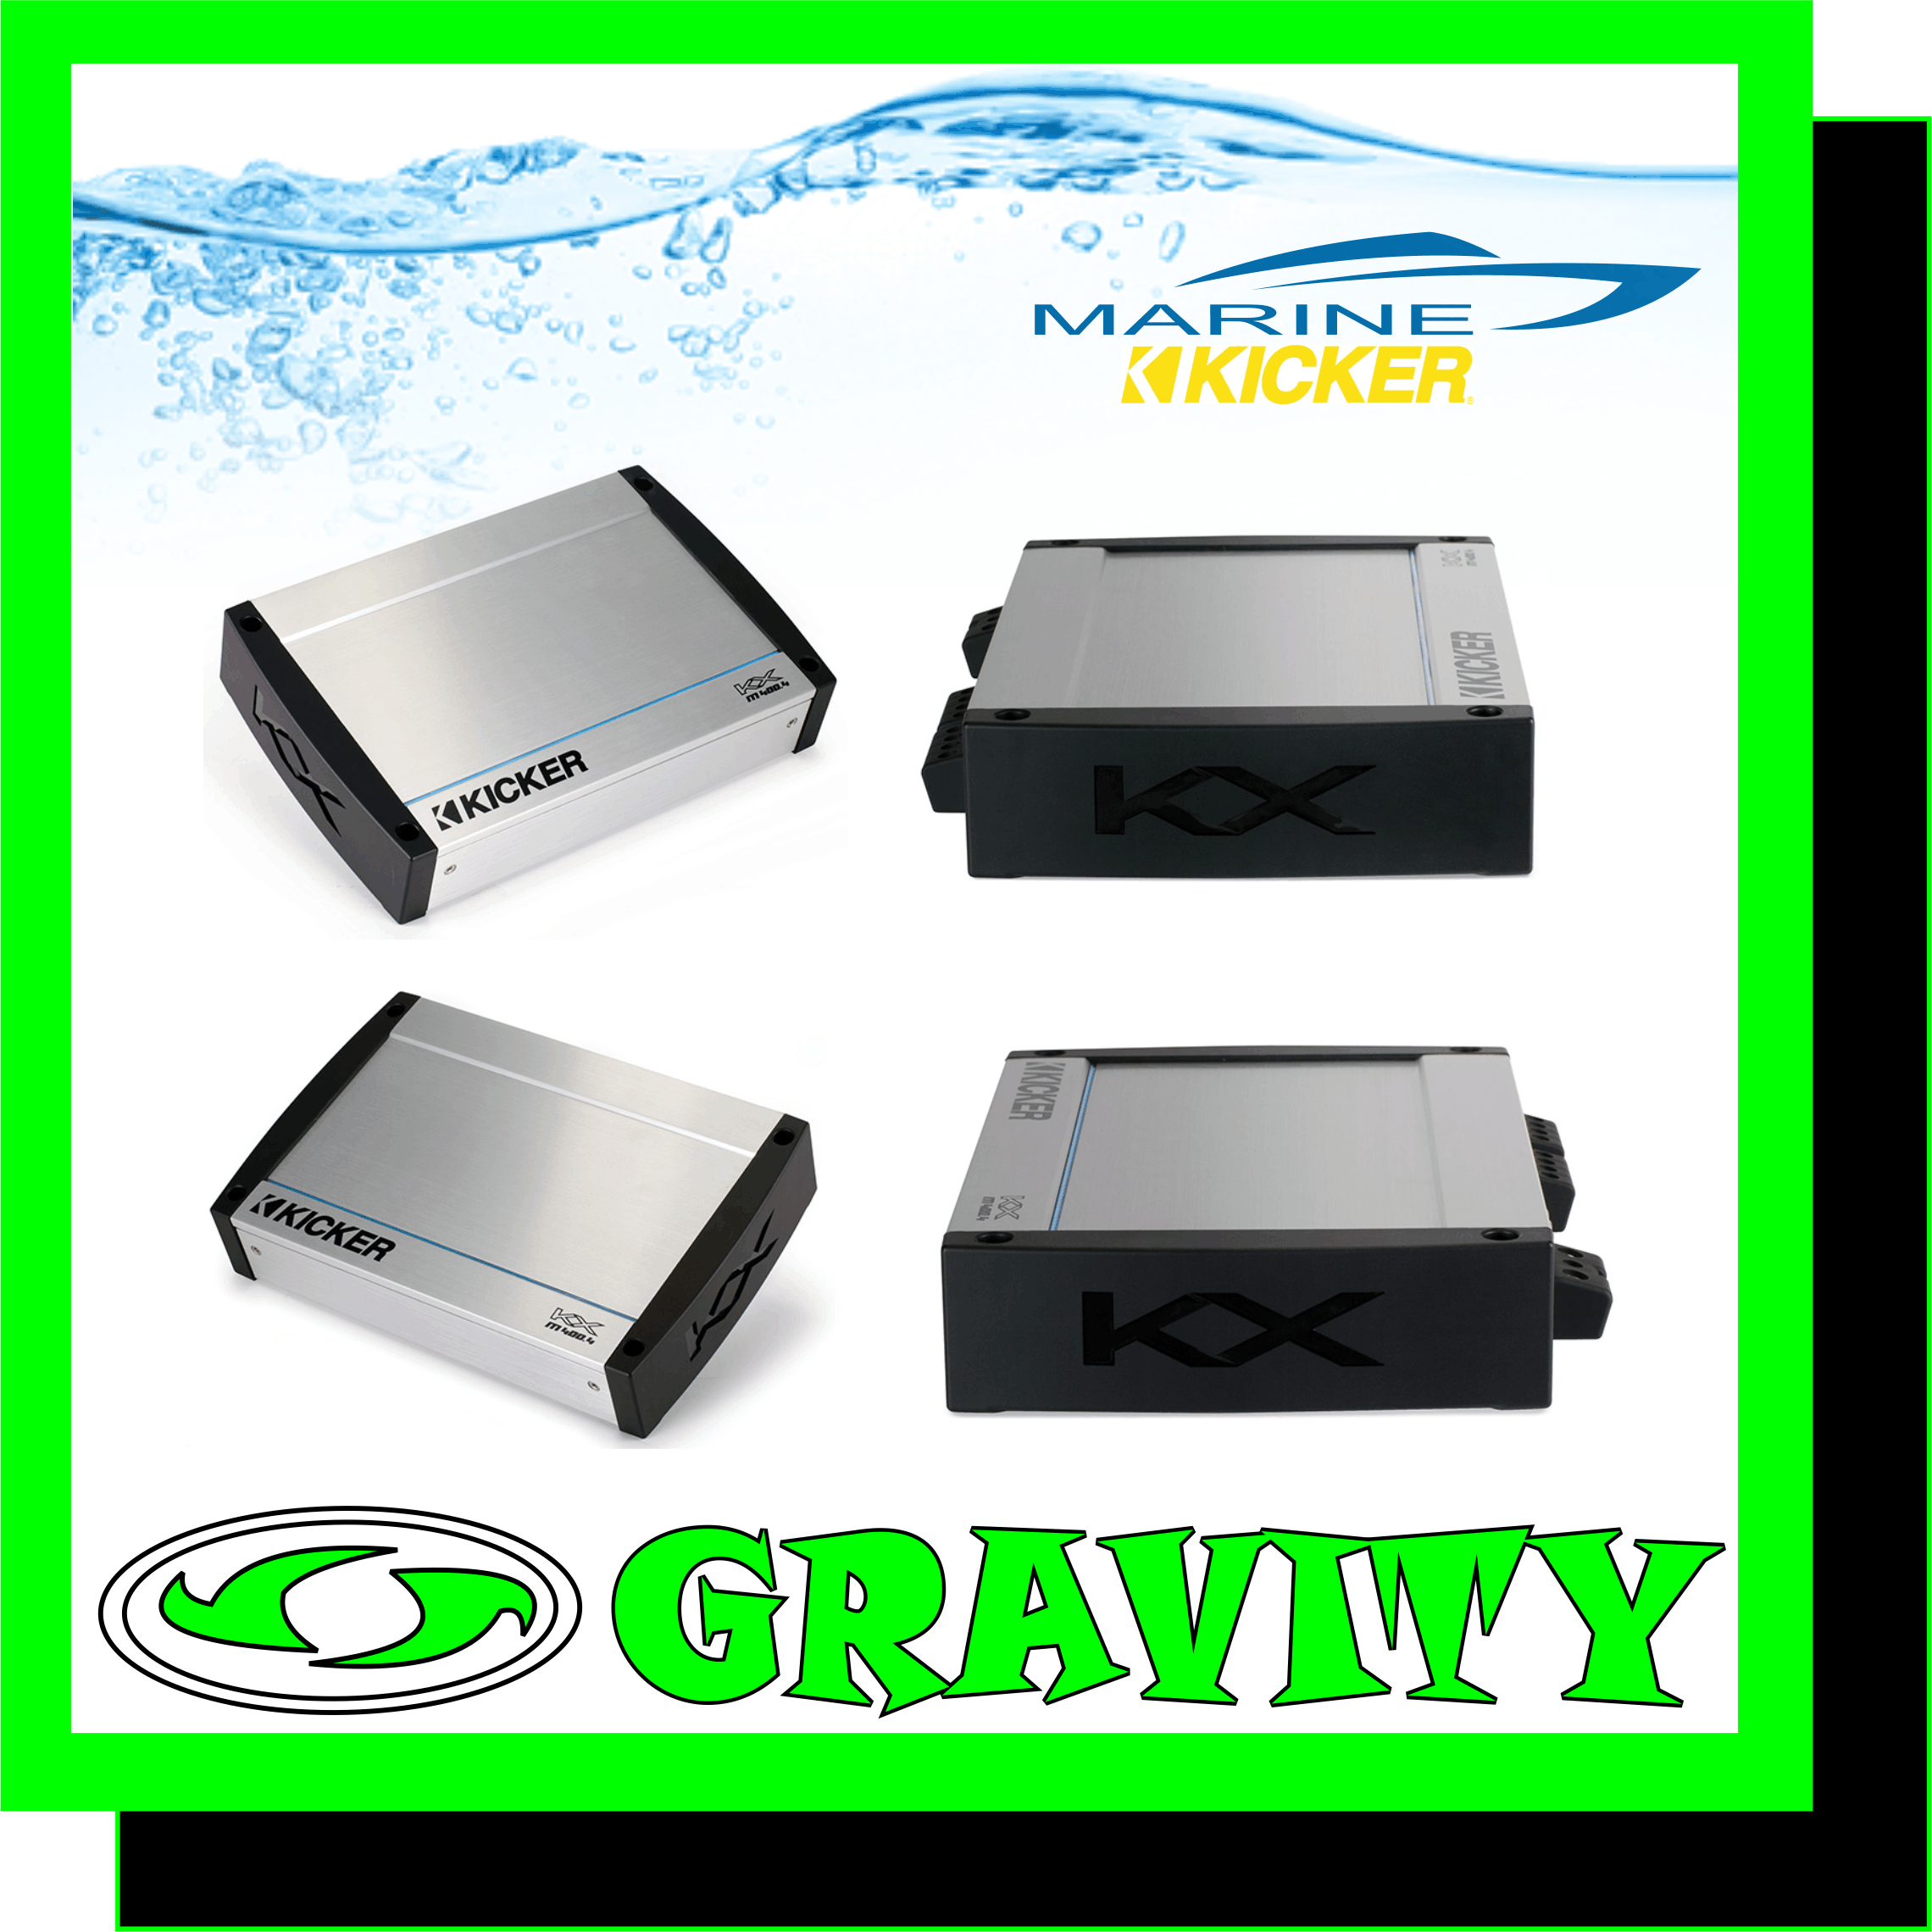 Kicker 40KXM4004 4�100-Watt Four-Channel Full-Range Class D Marine Amplifier  Power (watts/ch), Full-Range Class D 2 Ohm stereo 100�4 Power (watts/ch), Full-Range Class D 4 Ohm brdgd mono 200�2 Remote Bass Control (included) No ? Not Applicable Dimensions: 2-1/8 H x 8-5/16 W x 11-3/16 L (in.) 55 H x 210 W x 284 L (mm) Frequency Response (Hz): full range 10-20k (KXM.5 sub ch. 10-160) �1dB  Signal-to-Noise Ratio >95dB, A-weighted, re: rated power Active Crossover: (amp1) 24dB/octave, variable 10-500Hz, selectable high pass, low pass or all pass, w/10x switch; (amp2) 24dB/octave, variable high pass 10-500Hz, variable low pass 40-500Hz, selectable high pass, low pass, all pass or band pass, w/10x switch for lo pass; (KXM.5 sub channel) 24dB/octave, variable 40-160Hz low pass only Input Sensitivity Low Level: 125mV-5V High Level: 250mV-10V KickEQ? Boost: Variable +18dB @ 40Hz  Built for the Outdoors  KXM Amps were built for the outdoors. Power, speaker and input connections are gasket-sealed, as is the control cover hiding the settings, creating a water-resistant barrier to key components. The internal circuit board is sprayed with a moisture-deterring conformal coating for water and dirt resistance. The amplifier?s power connections meet marine-industry standards for protection against the elements. Stainless-steel mounting hardware prevents rust stains on carpeting and gel coat, and the UV-treated chassis finish battles harsh sunlight.  KXM Amplifiers  KICKER� takes proven technologies and advanced components to the water with KXM-Series Marine Amplifiers. Based on the critically acclaimed KX-Series Amplifier line for cars and trucks, weather-resistant KXM Amps utilize class-leading features specific for unbelievable sound in the boating environment, and within the most compact chassis for installing in tight locations.  KICKER KXM400.4 Amplifier  KXM Amps were built for the outdoors. Power, speaker and input connections are gasket-sealed, as is the control cover hiding the settings, creating a water-resistant barrier to key components. The internal circuit board is sprayed with a moisture-deterring conformal coating for water and dirt resistance. The amplifier?s power connections meet marine-industry standards for protection against the elements. Stainless-steel mounting hardware prevents rust stains on carpeting and gel coat, and the UV-treated chassis finish battles harsh sunlight.   KICKER KXM400.4 Amplifier KXM Amps were built for the outdoors. Power, speaker and input connections are gasket-sealed, as is the control cover hiding the settings, creating a water-resistant barrier to key components. The internal circuit board is sprayed with a moisture-deterring conformal coating for water and dirt resistance. The amplifier's power connections meet marine-industry standards for protection against the elements. Stainless-steel mounting hardware prevents rust stains on carpeting and gel coat, and the UV-treated chassis finish battles harsh sunlight.